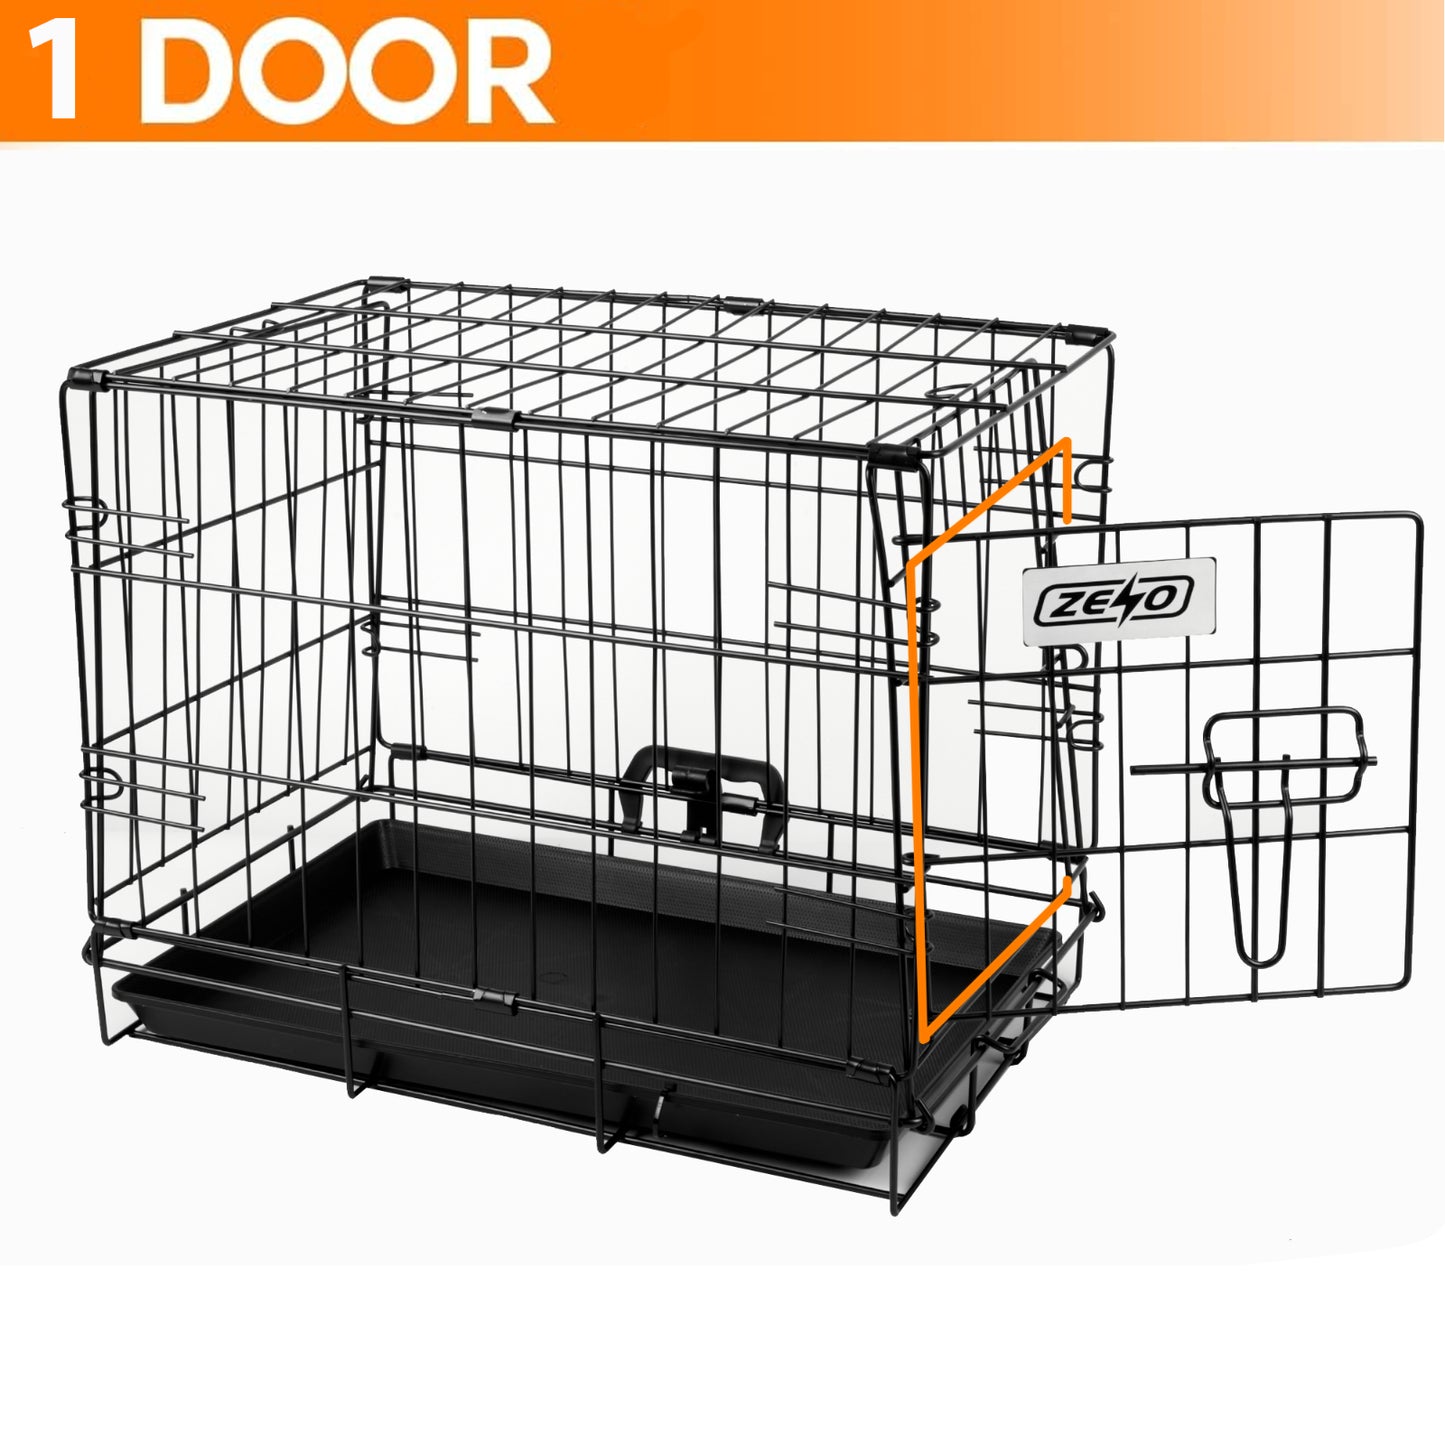 DOG CAGE PUPPY TRAINING CRATE PET CARRIER SMALL MEDIUM LARGE XL XXL METAL CAGES